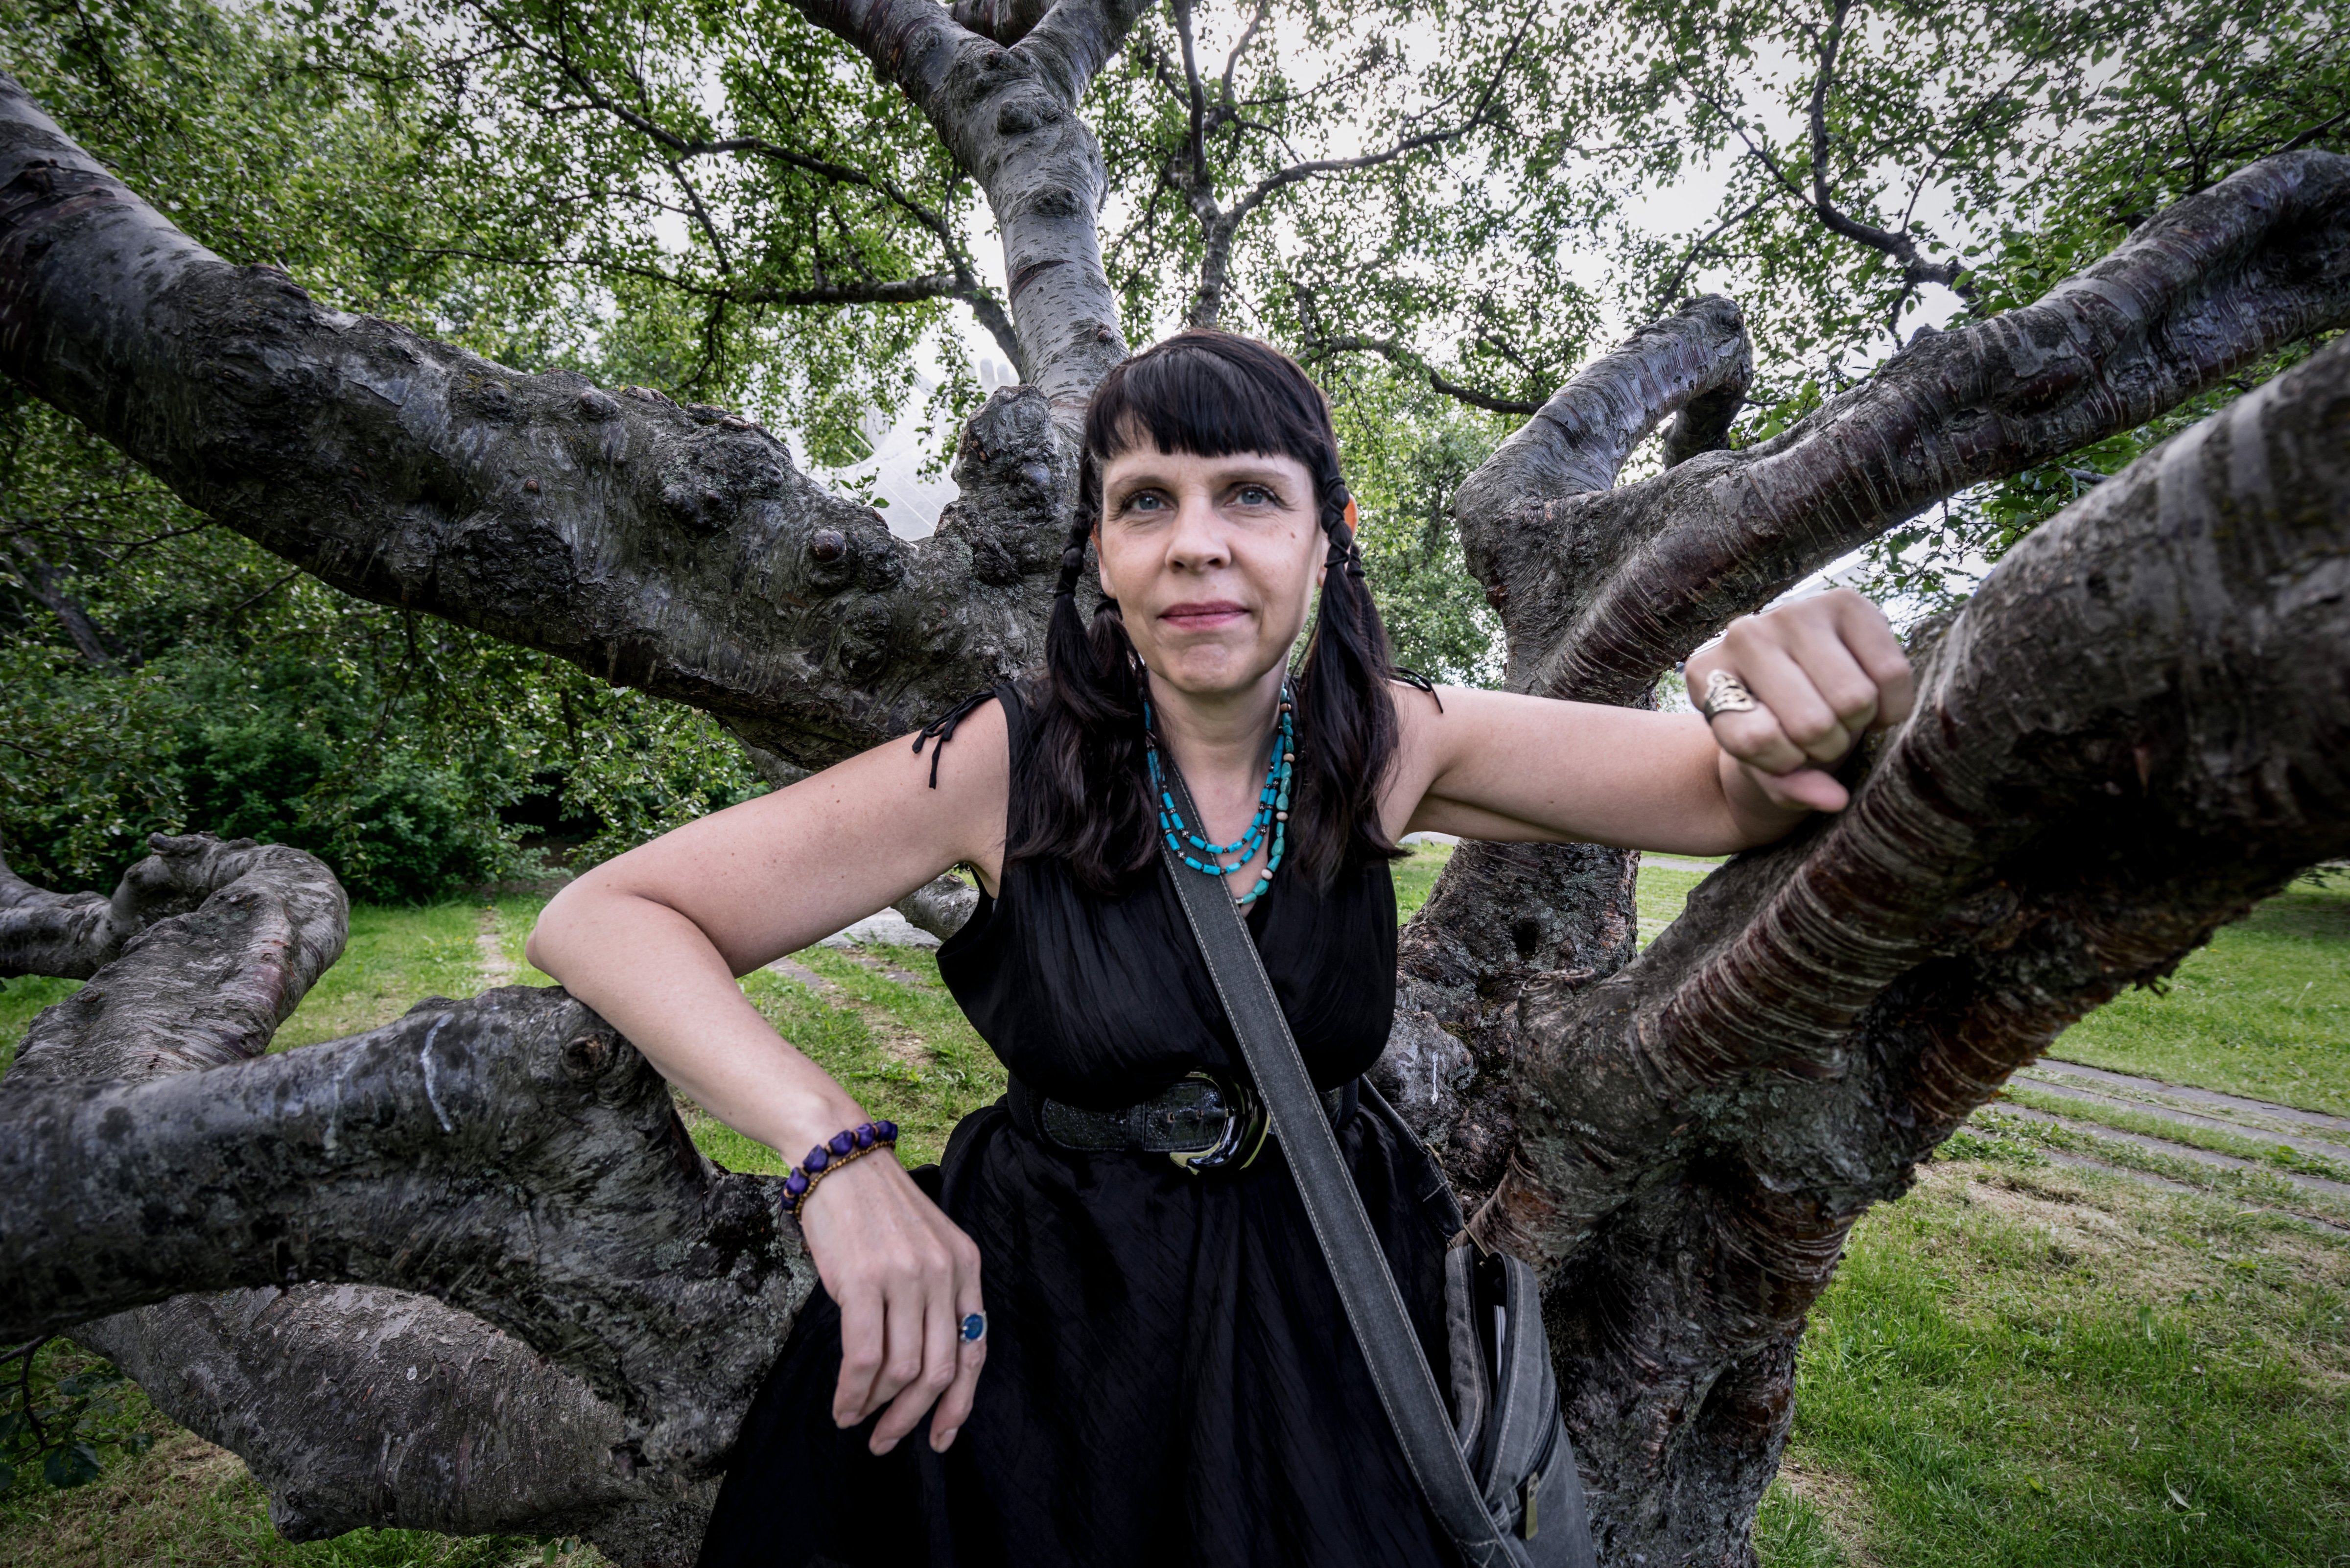 Birgitta Jonsdottir, activist member of the Icelandic parliament representing the Pirate Party, stands in front of a sculpture at an Icelandic sculpture park on July 9, 2015 (Giles Clarke—Getty Images)